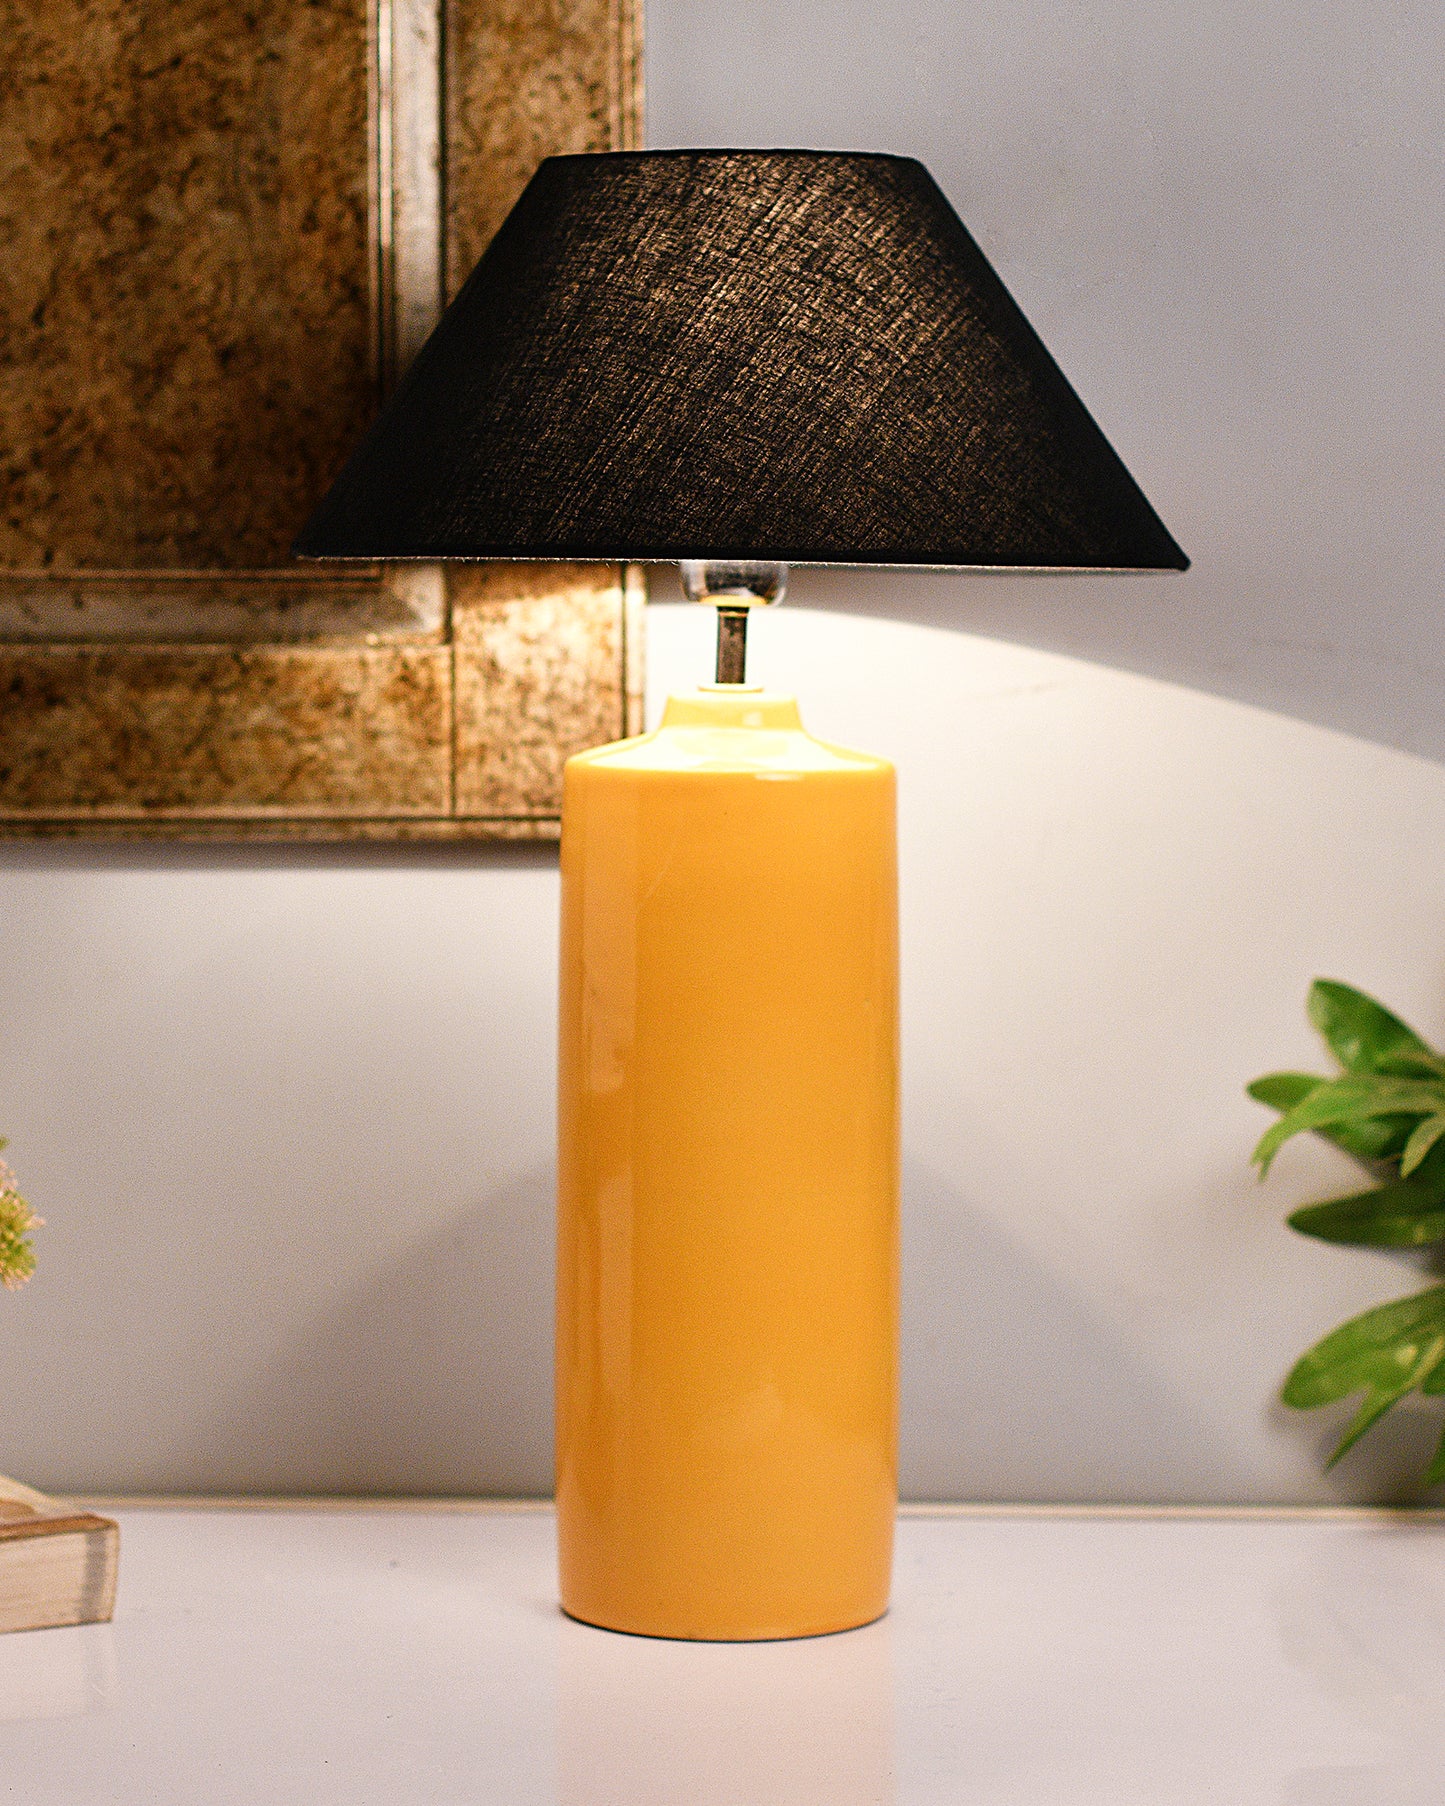 Ceramic Base Yellow Table Lamp with Cone Shade, LED Bulb